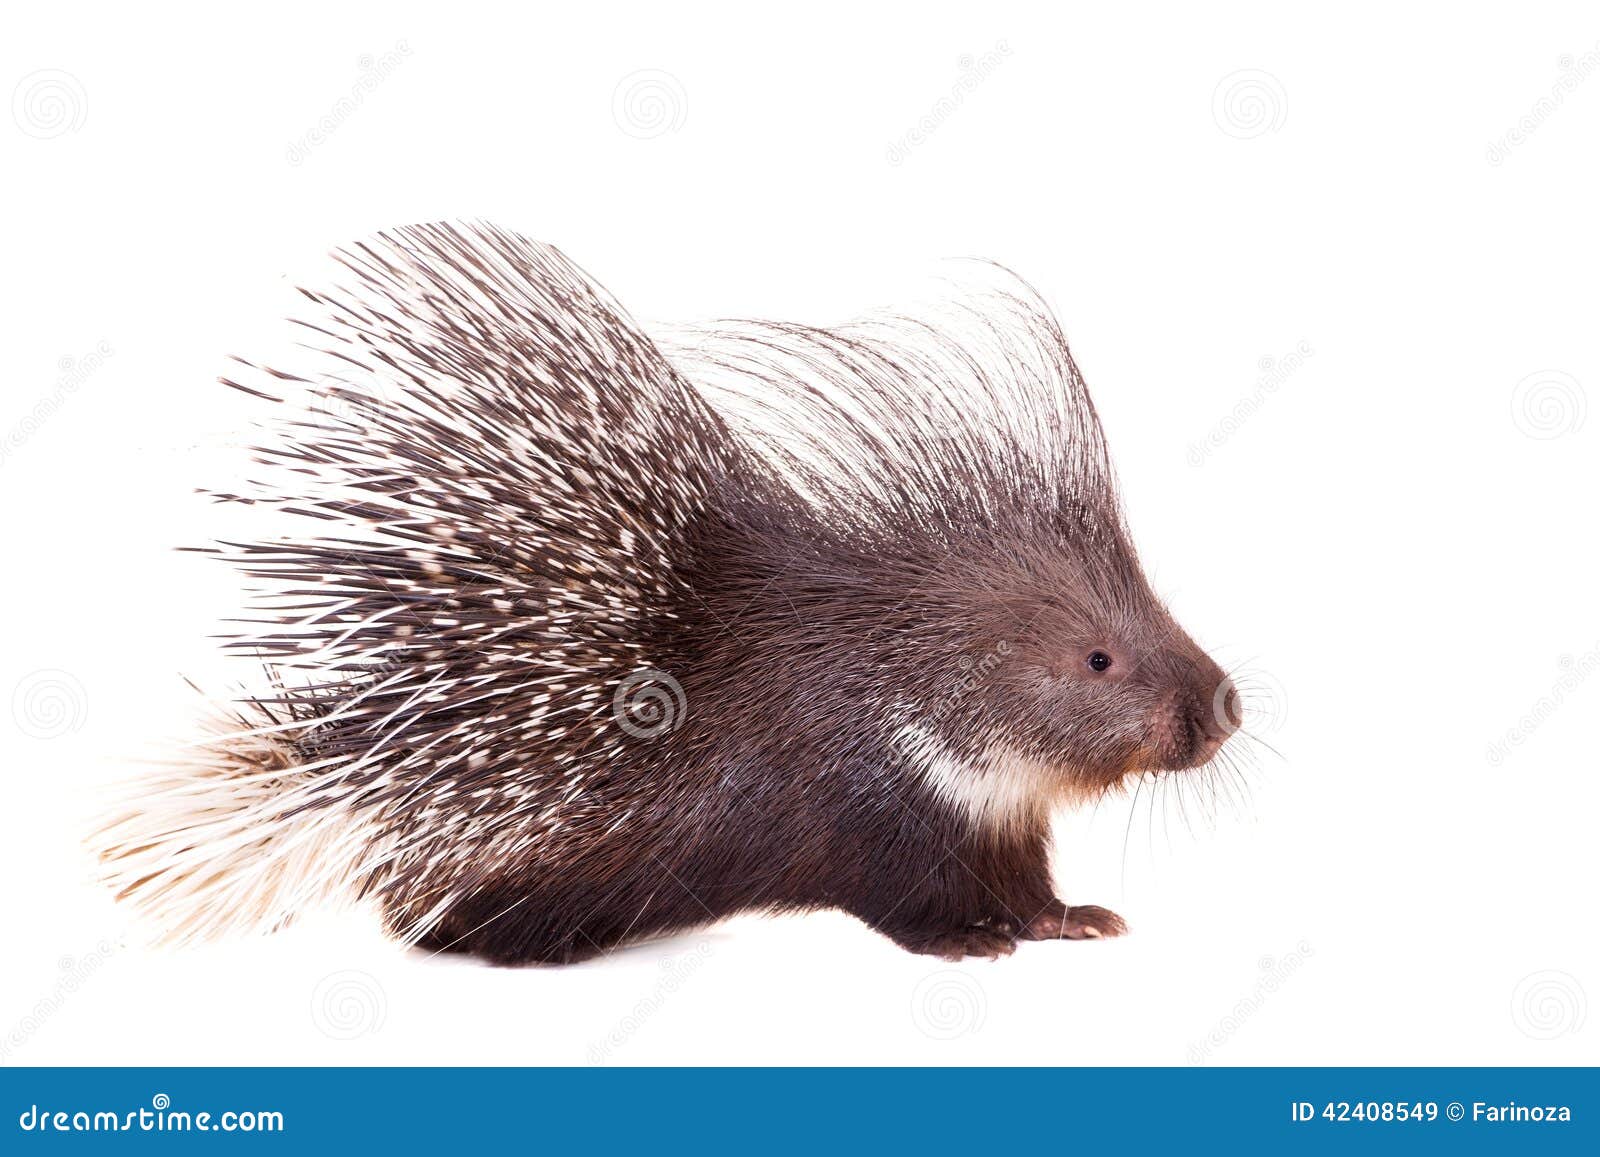 indian crested porcupine on white